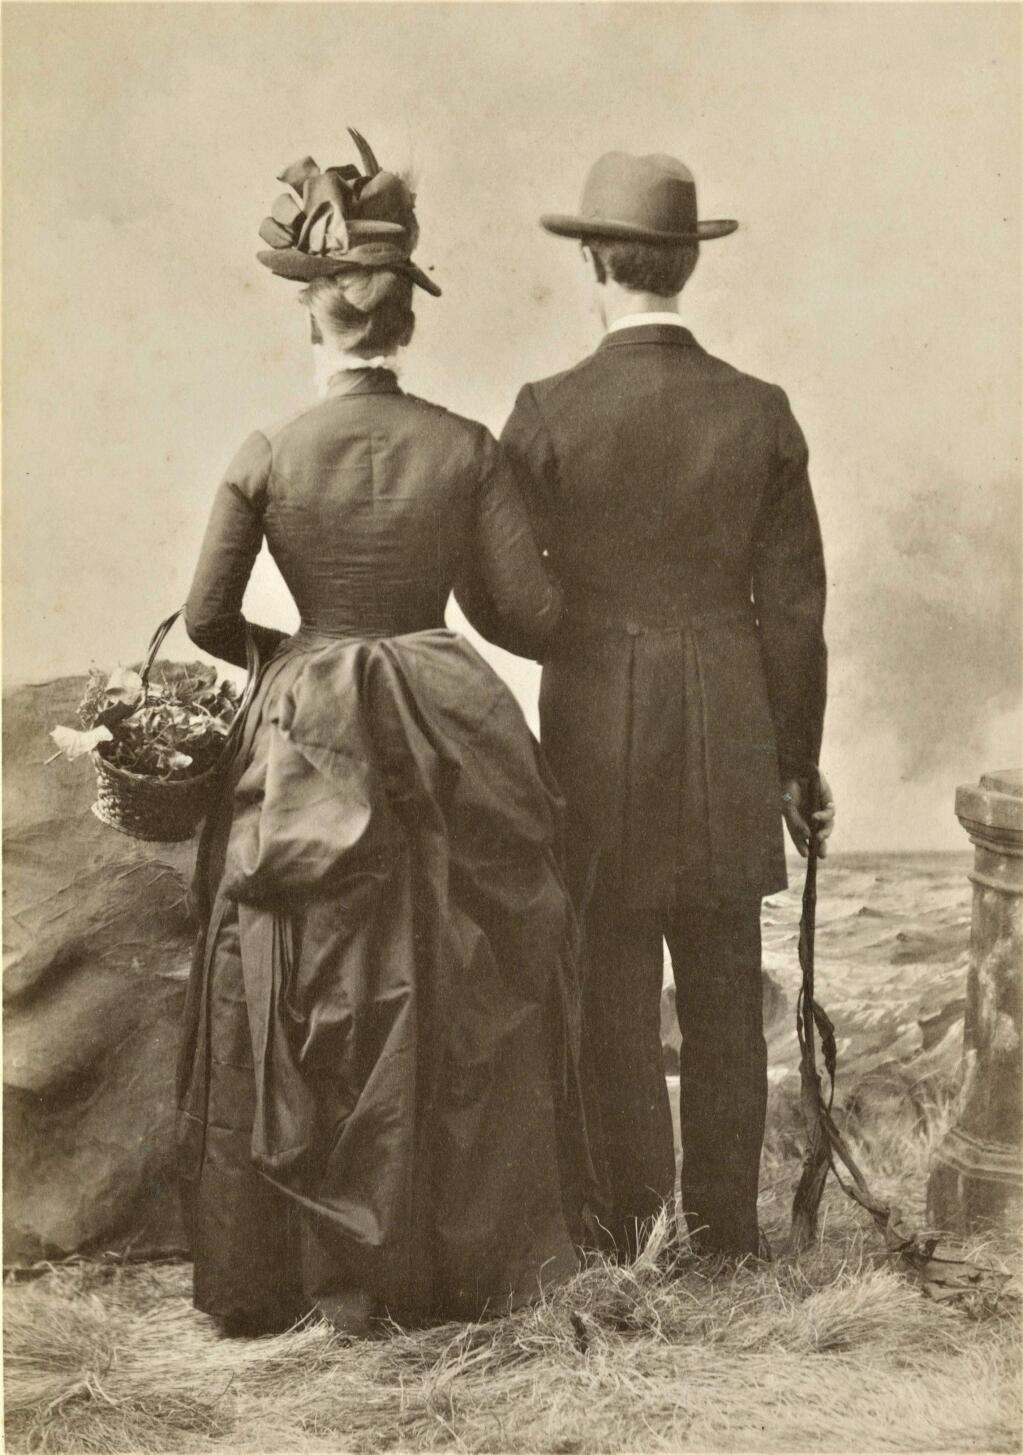 Portrait of an unidentified couple with their backs to the camera, late 1880s. (Courtesy of the Sonoma County Library)